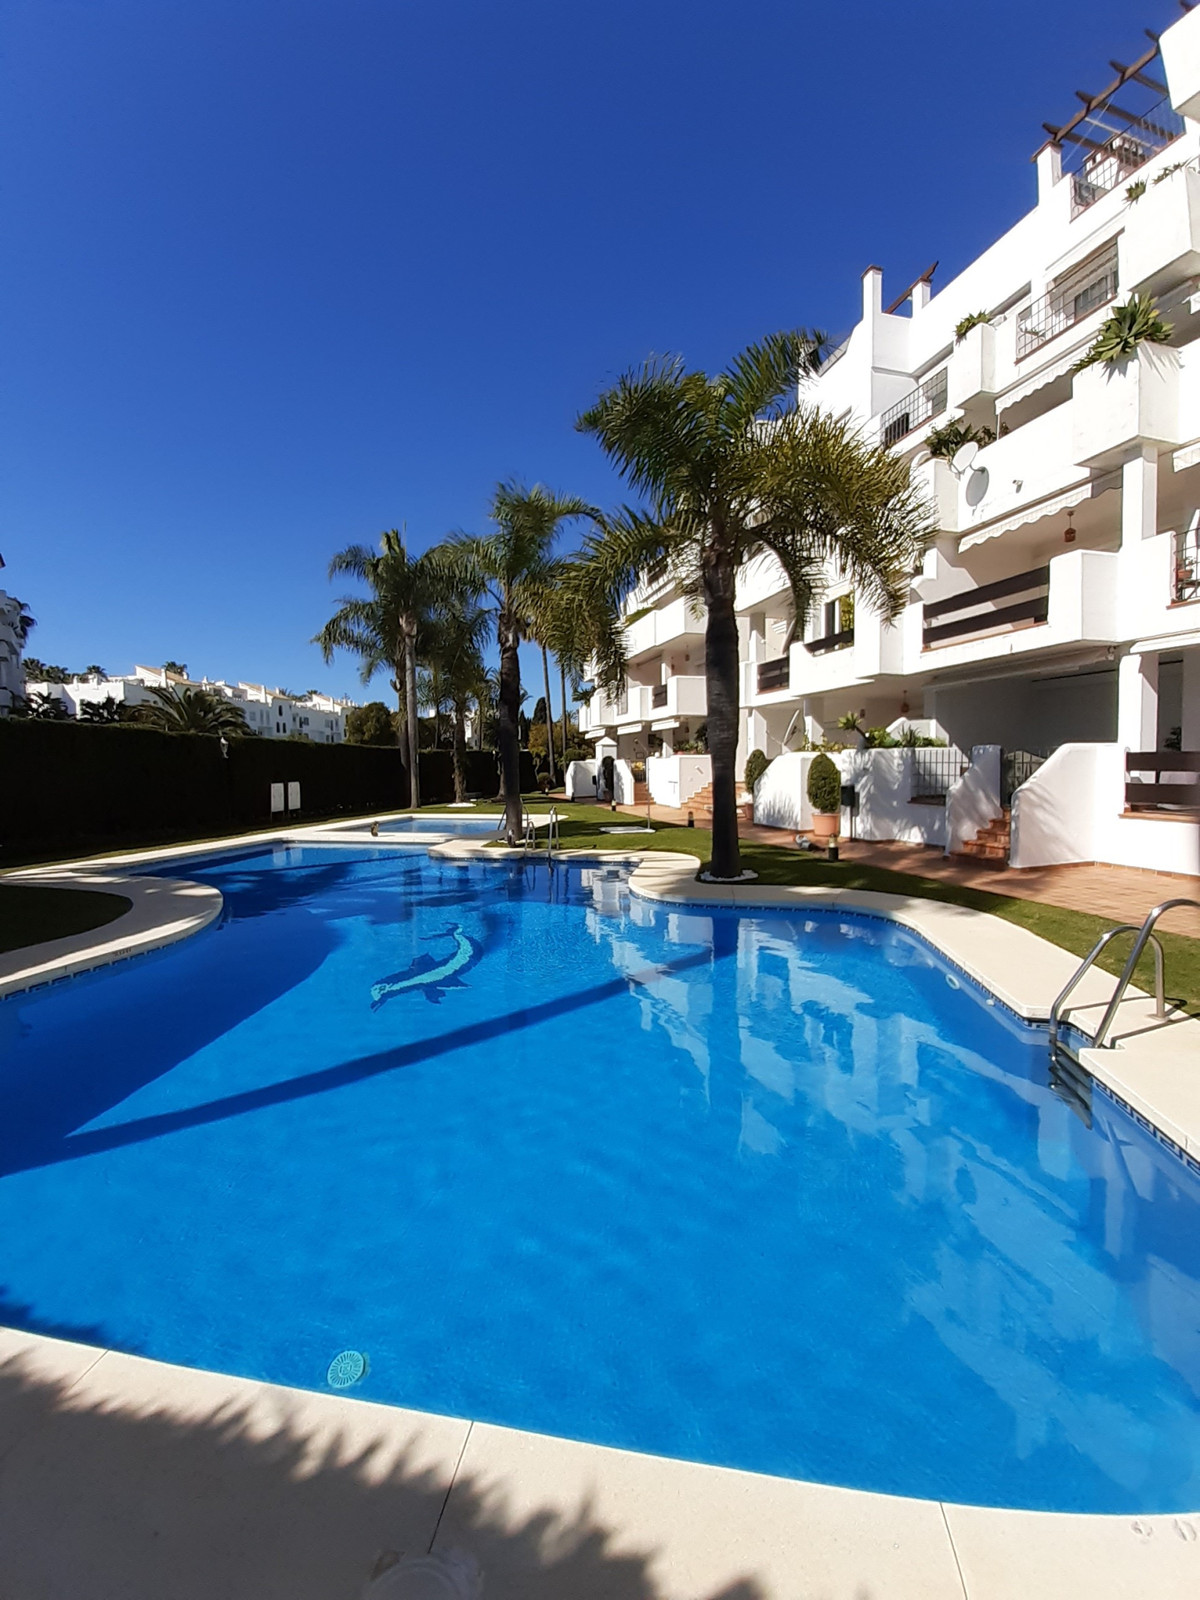 "Bright beachside corner apartment located in one of the most prestigious and established residential developments of Puerto Banus.With a wonderful...